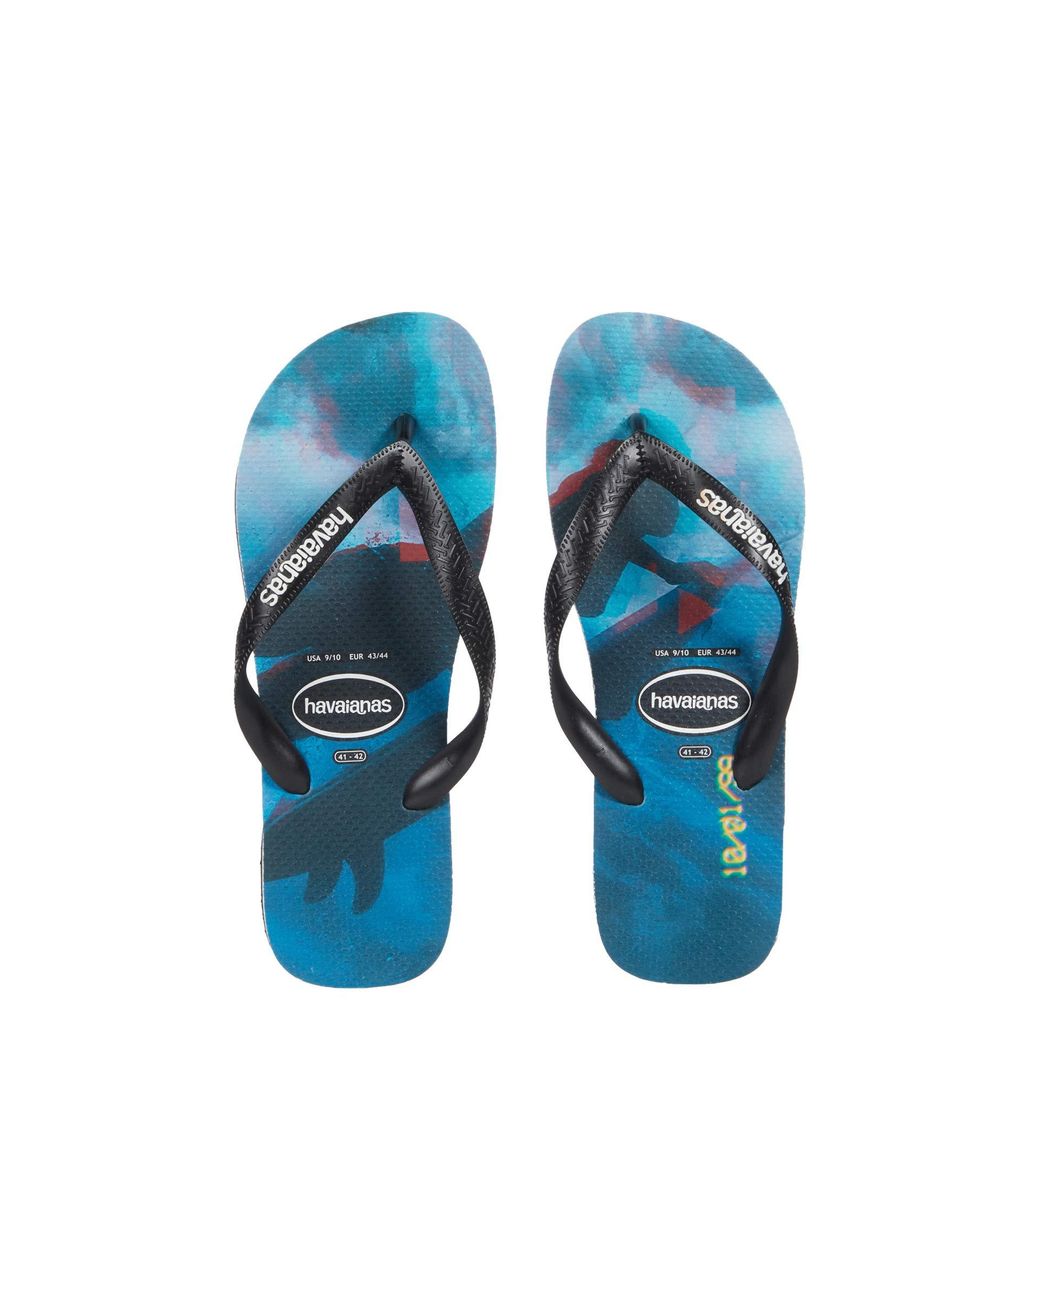 Havaianas Rubber Top Photoprint Sandal Sandals in Black for Men - Lyst